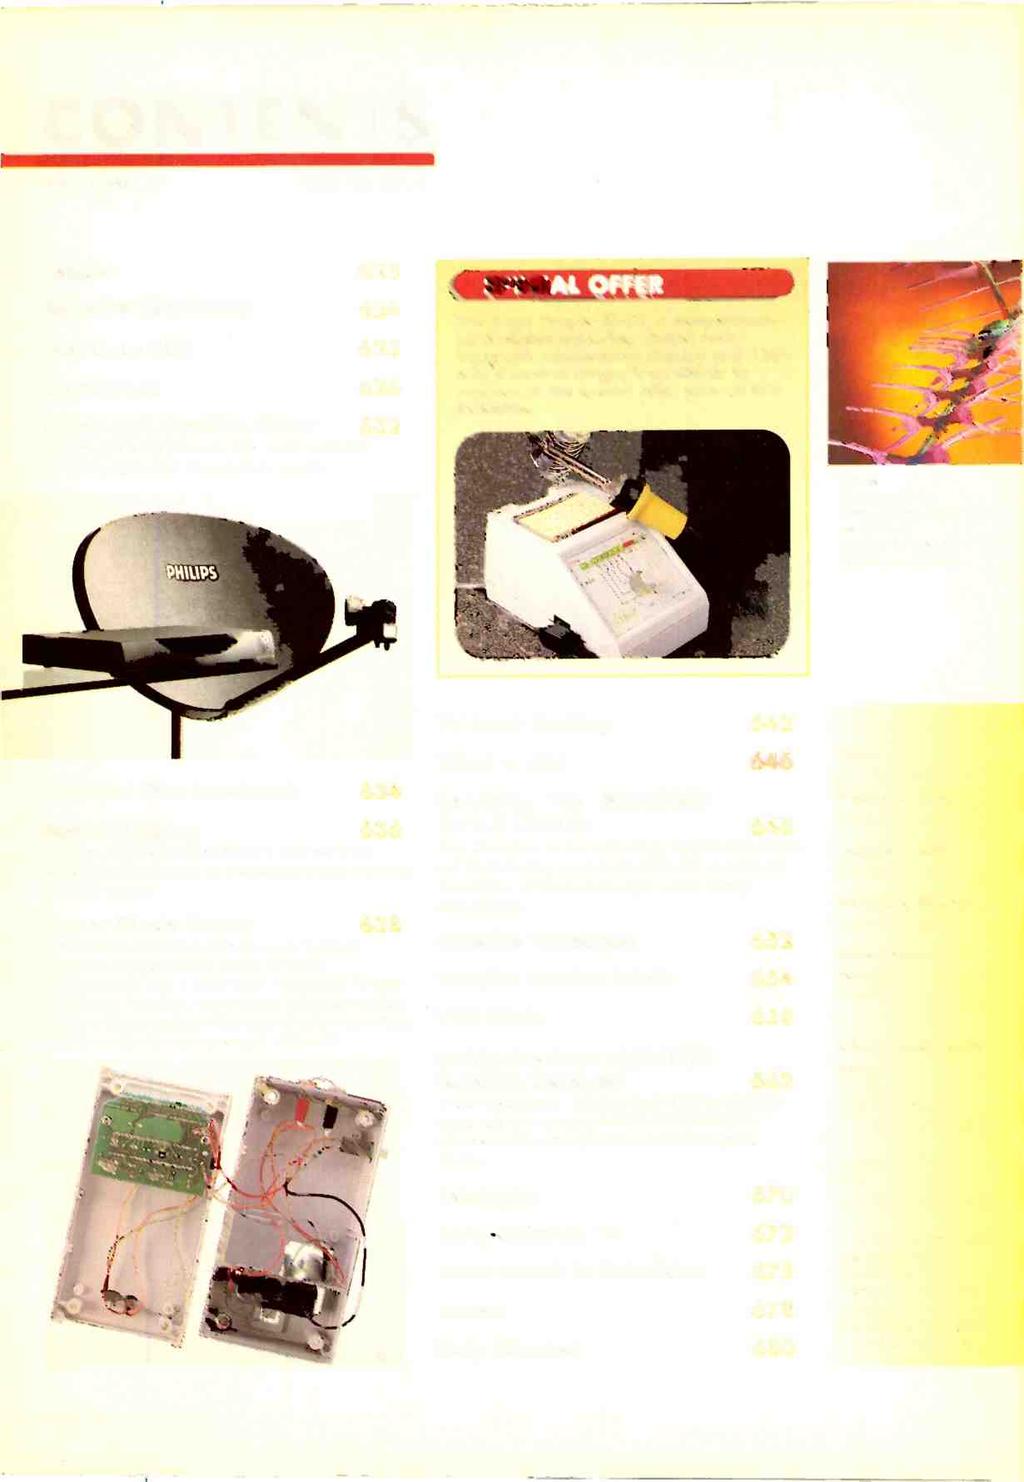 CONTENTS JULY 1996 VOL. 46, NO. 9 Leader 623 Saitelite Workshop 624 Test Case 403 625 Camcorner 626 Cable and Satellite Show 632 The emphasis this year was very much on digital receiving equipment.